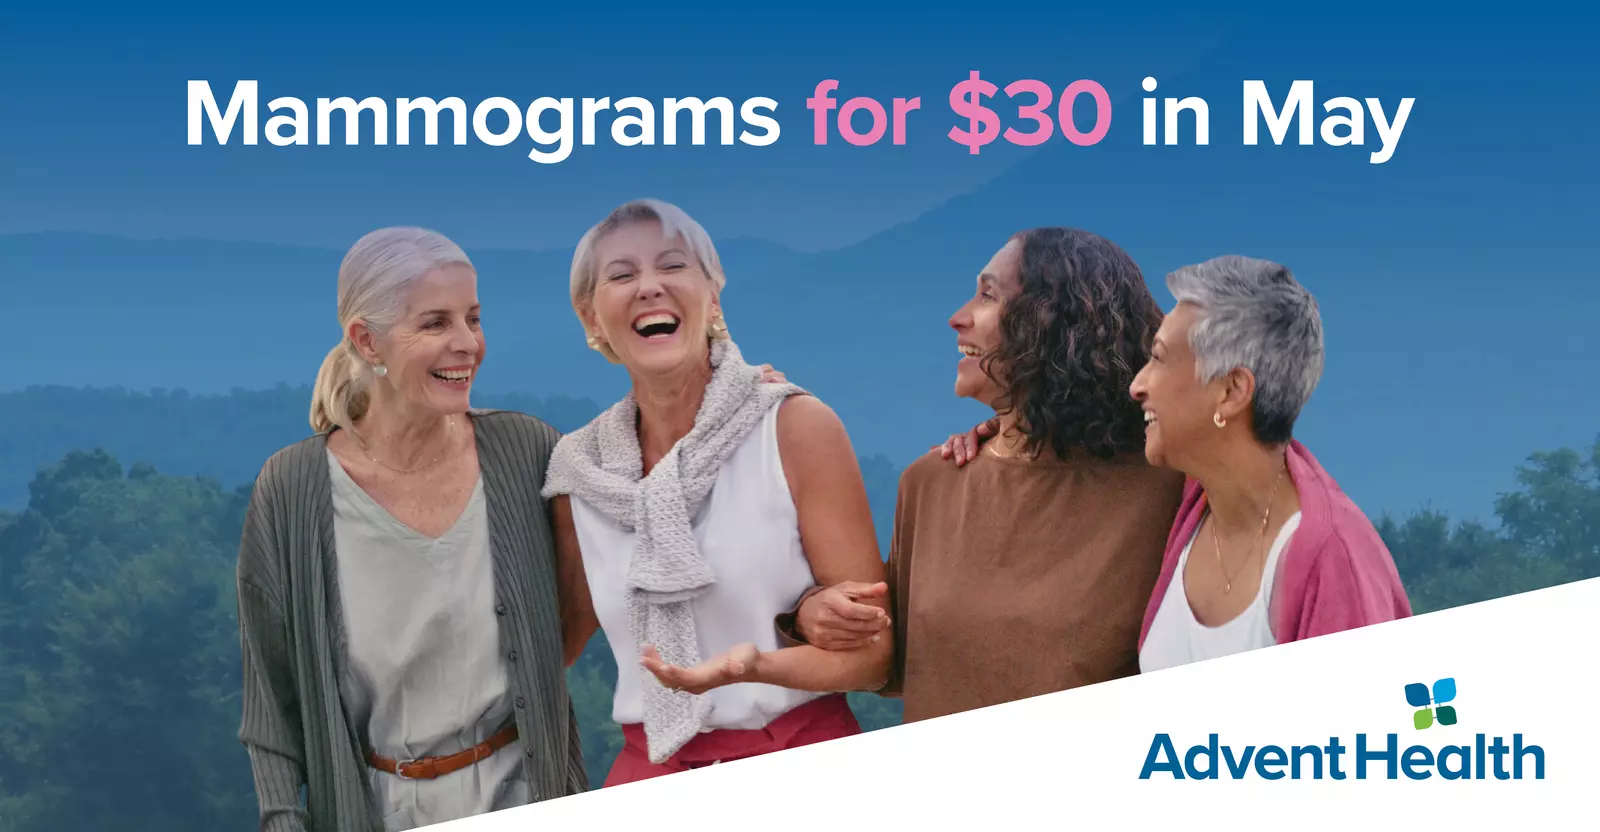 Mammograms for $30 in May